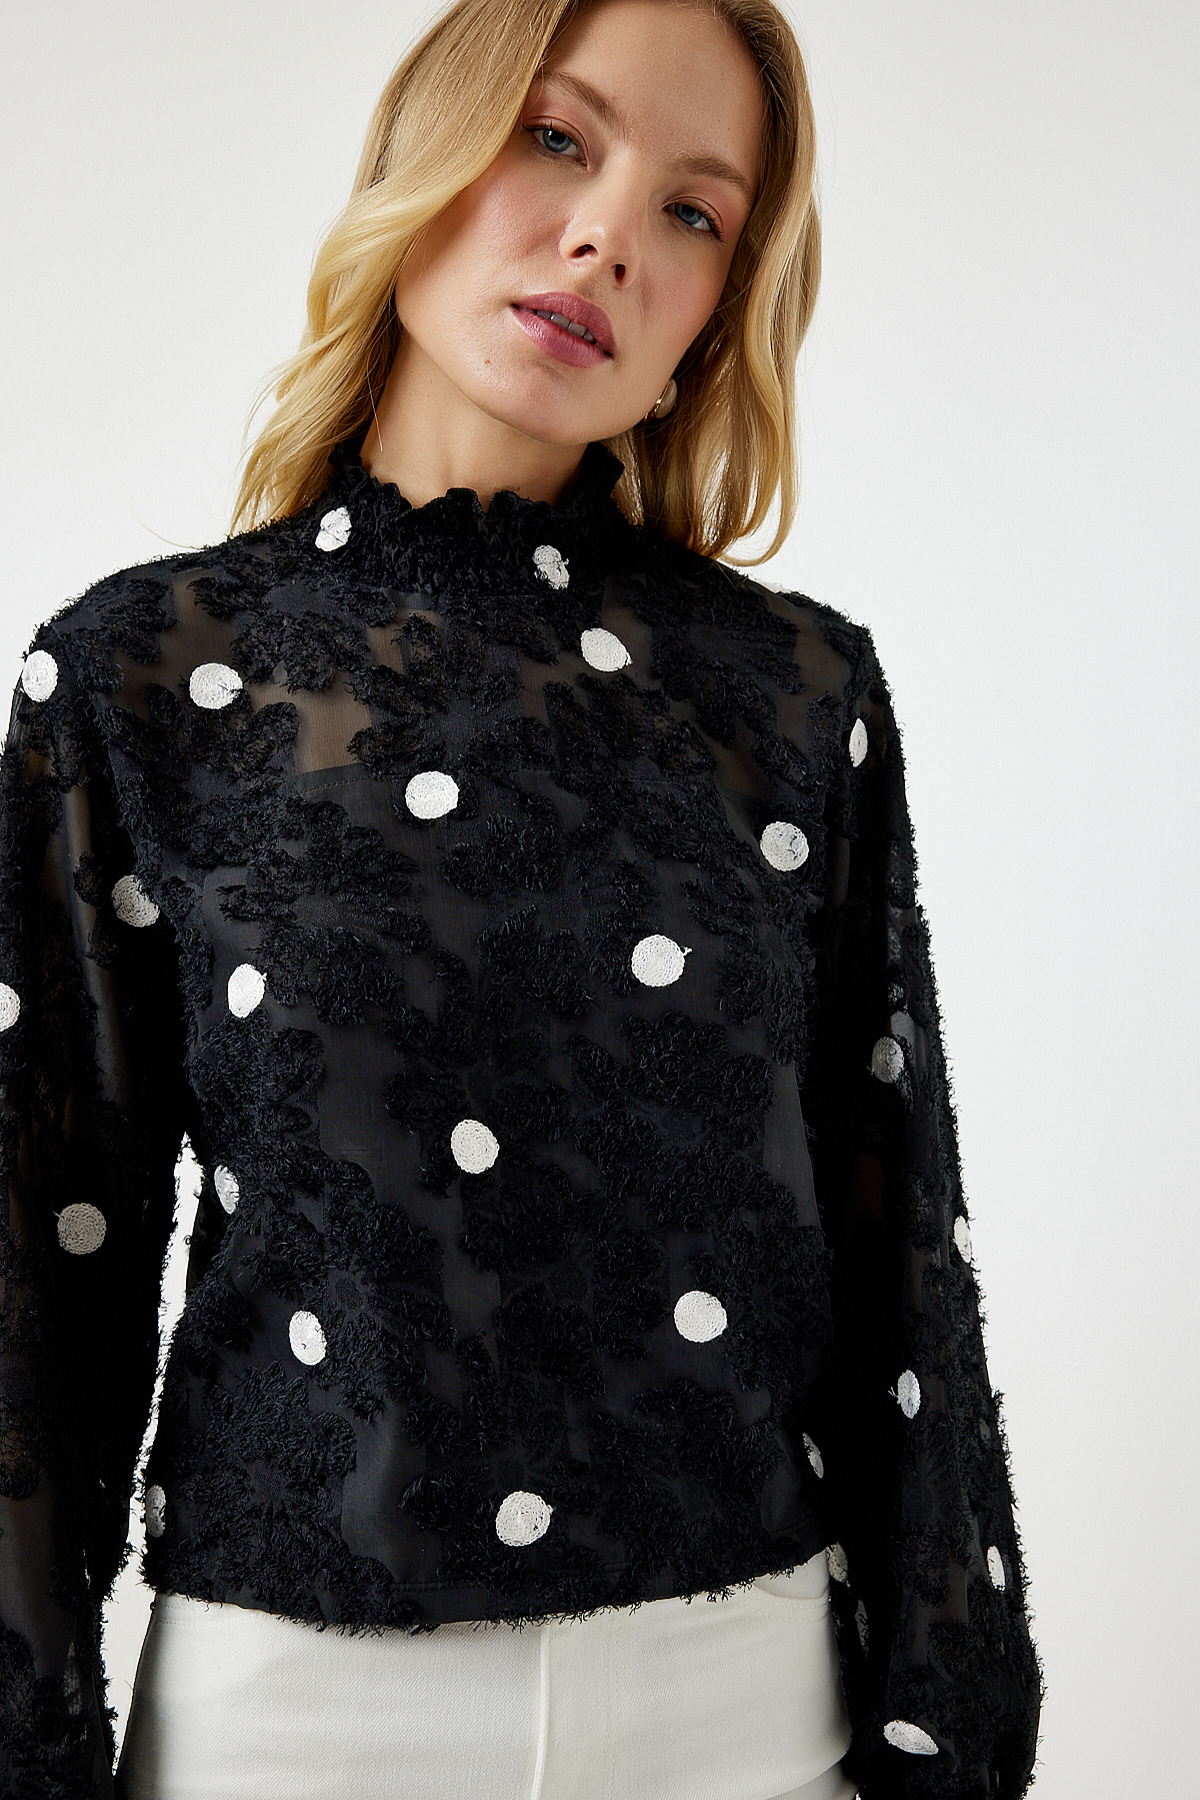 Happiness İstanbul Women's Black Marked Polka Dot Woven Blouse